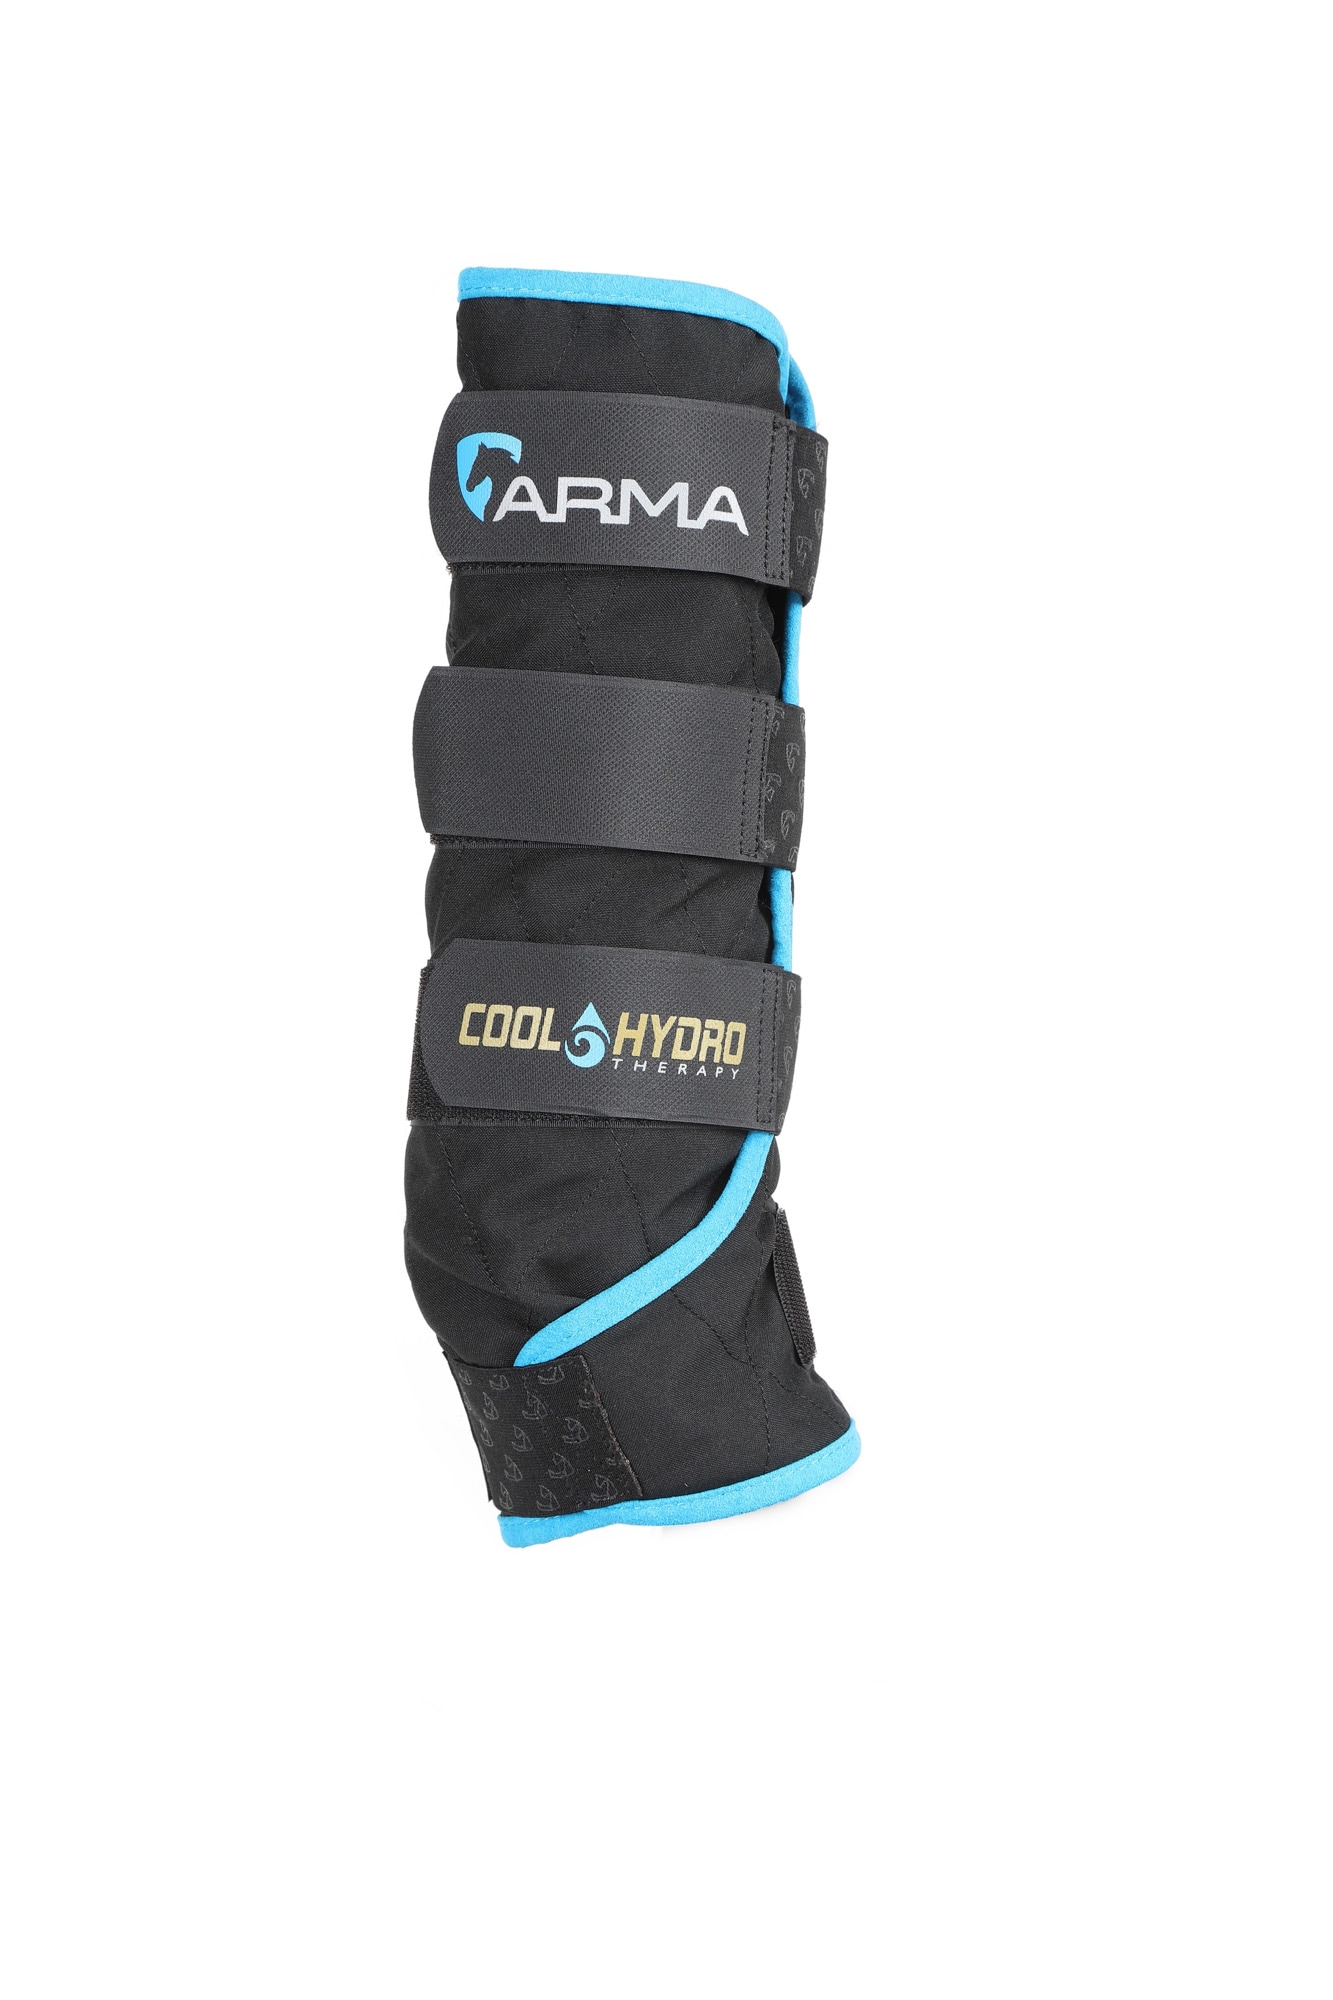 arma-kylbandage-cool-hydro-therapy